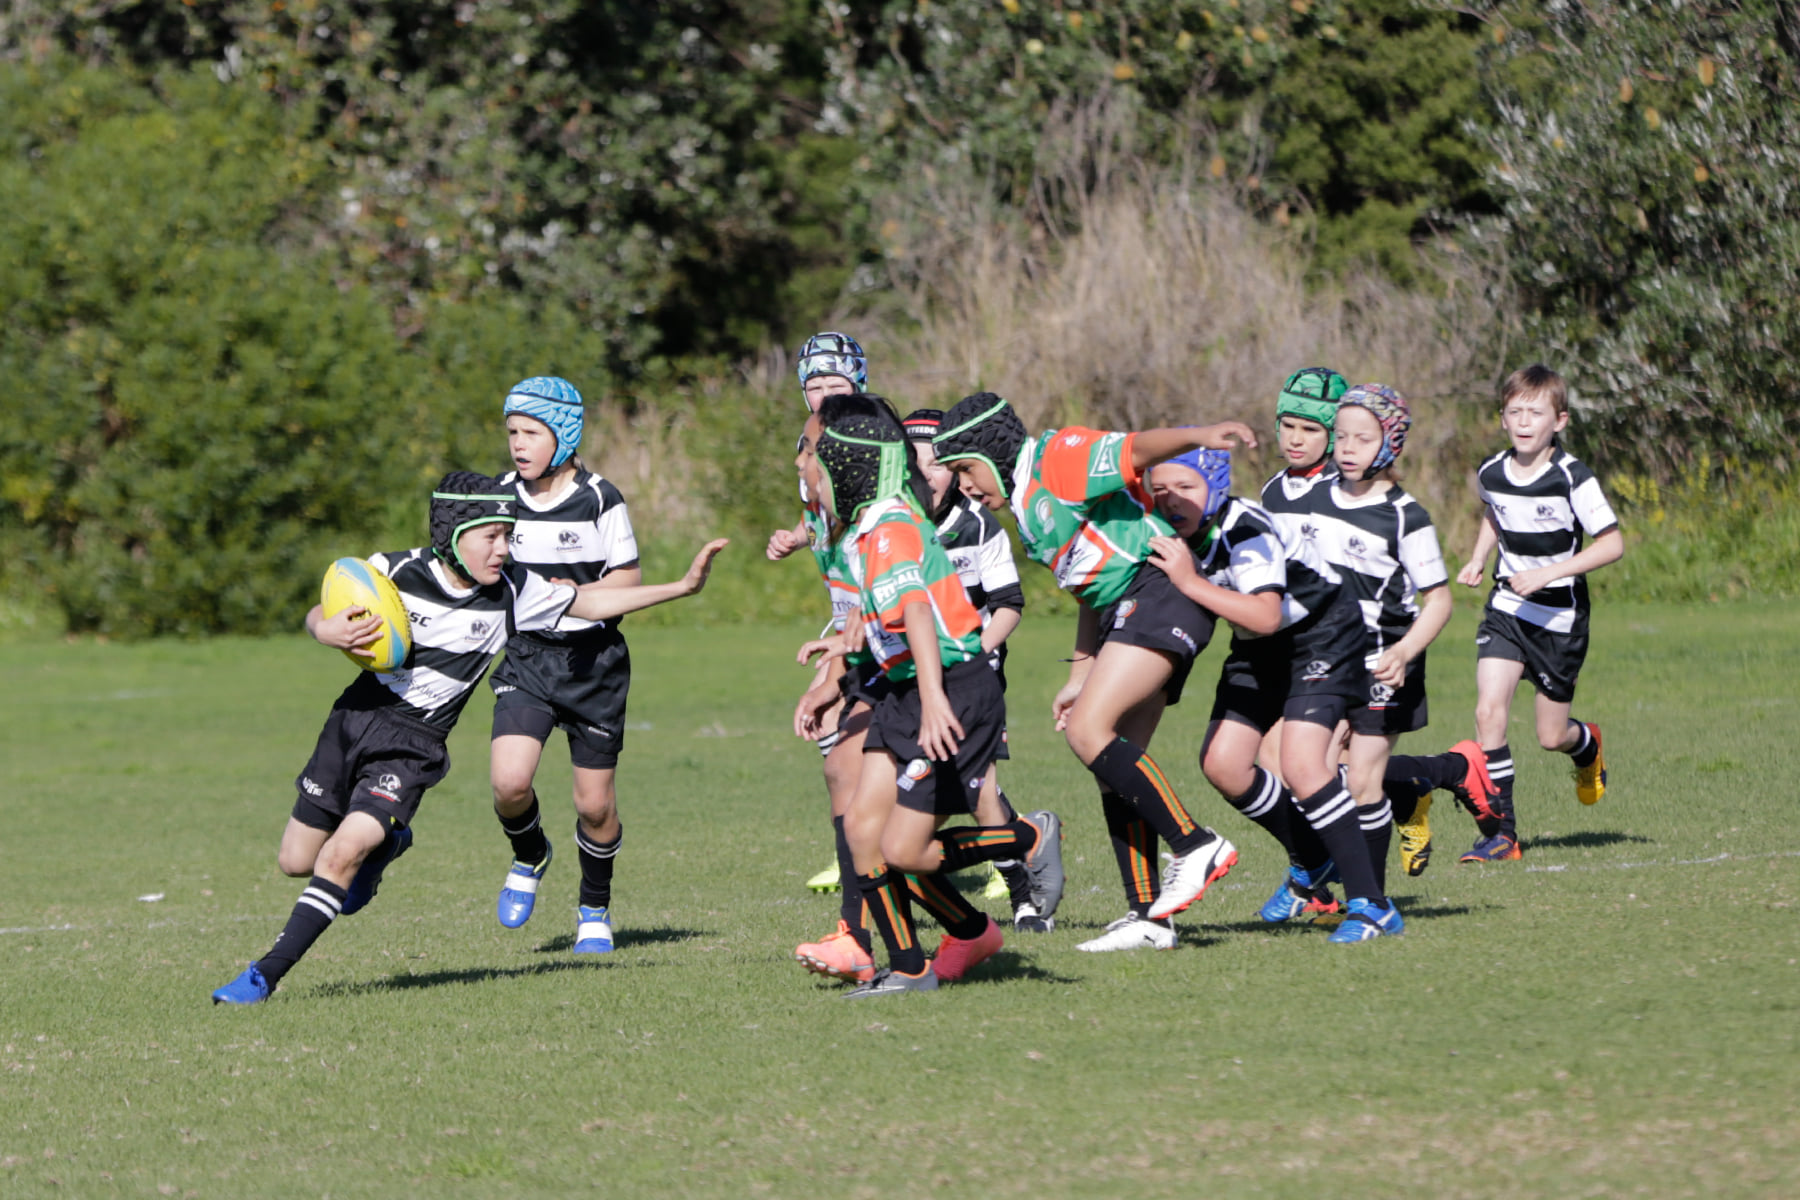 Action from the U10s game against Penrith...